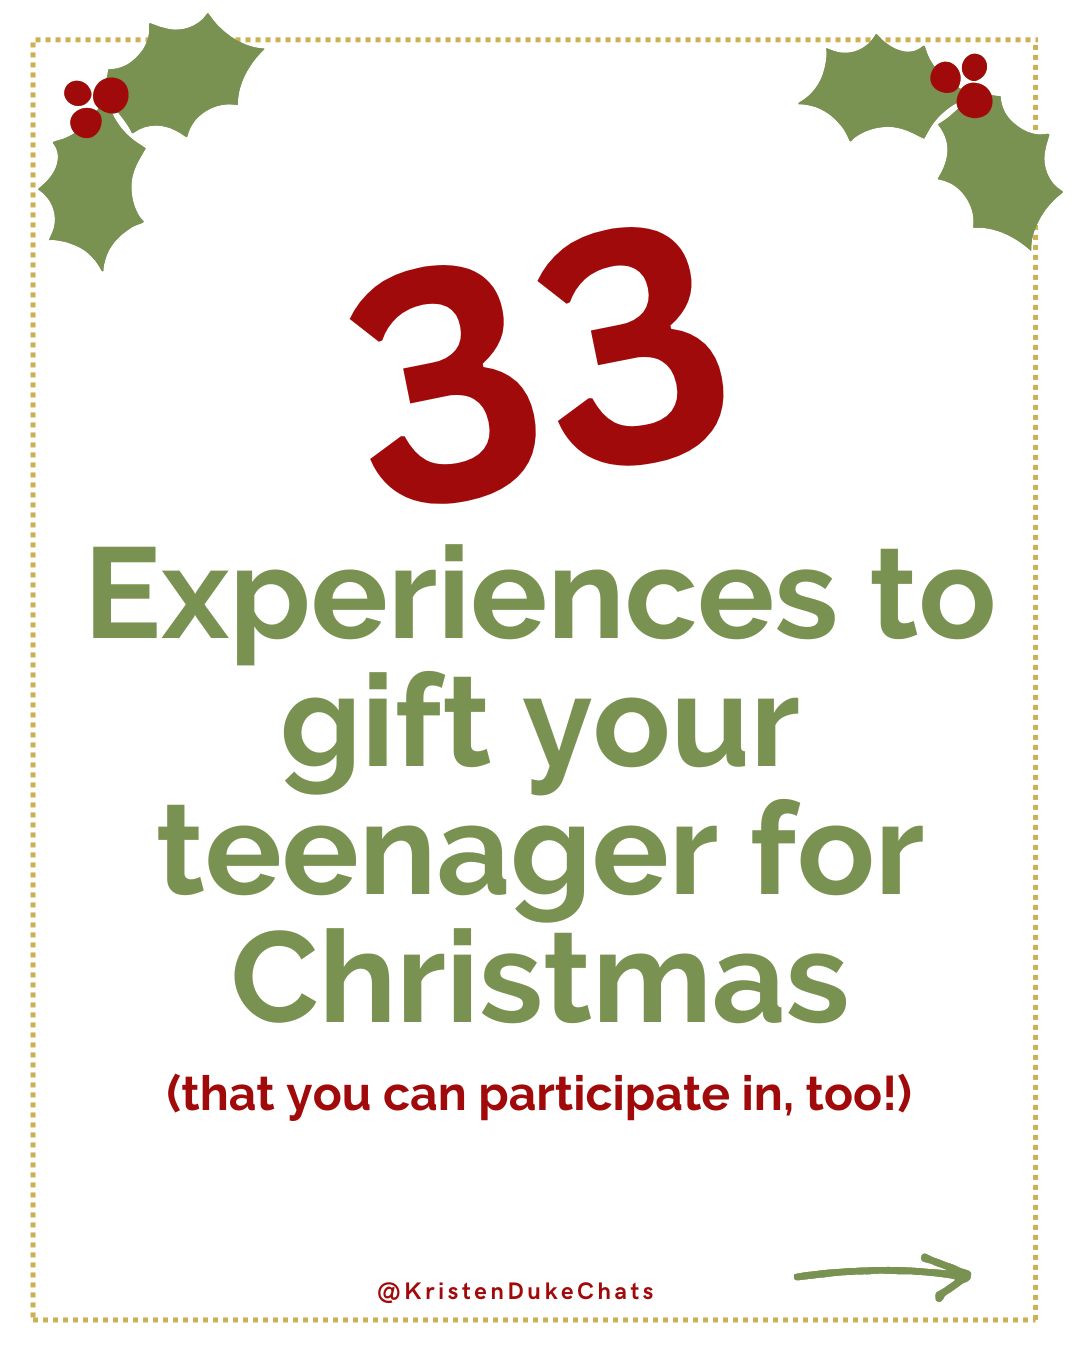 Experiences to gift your teenager for Christmas or other times